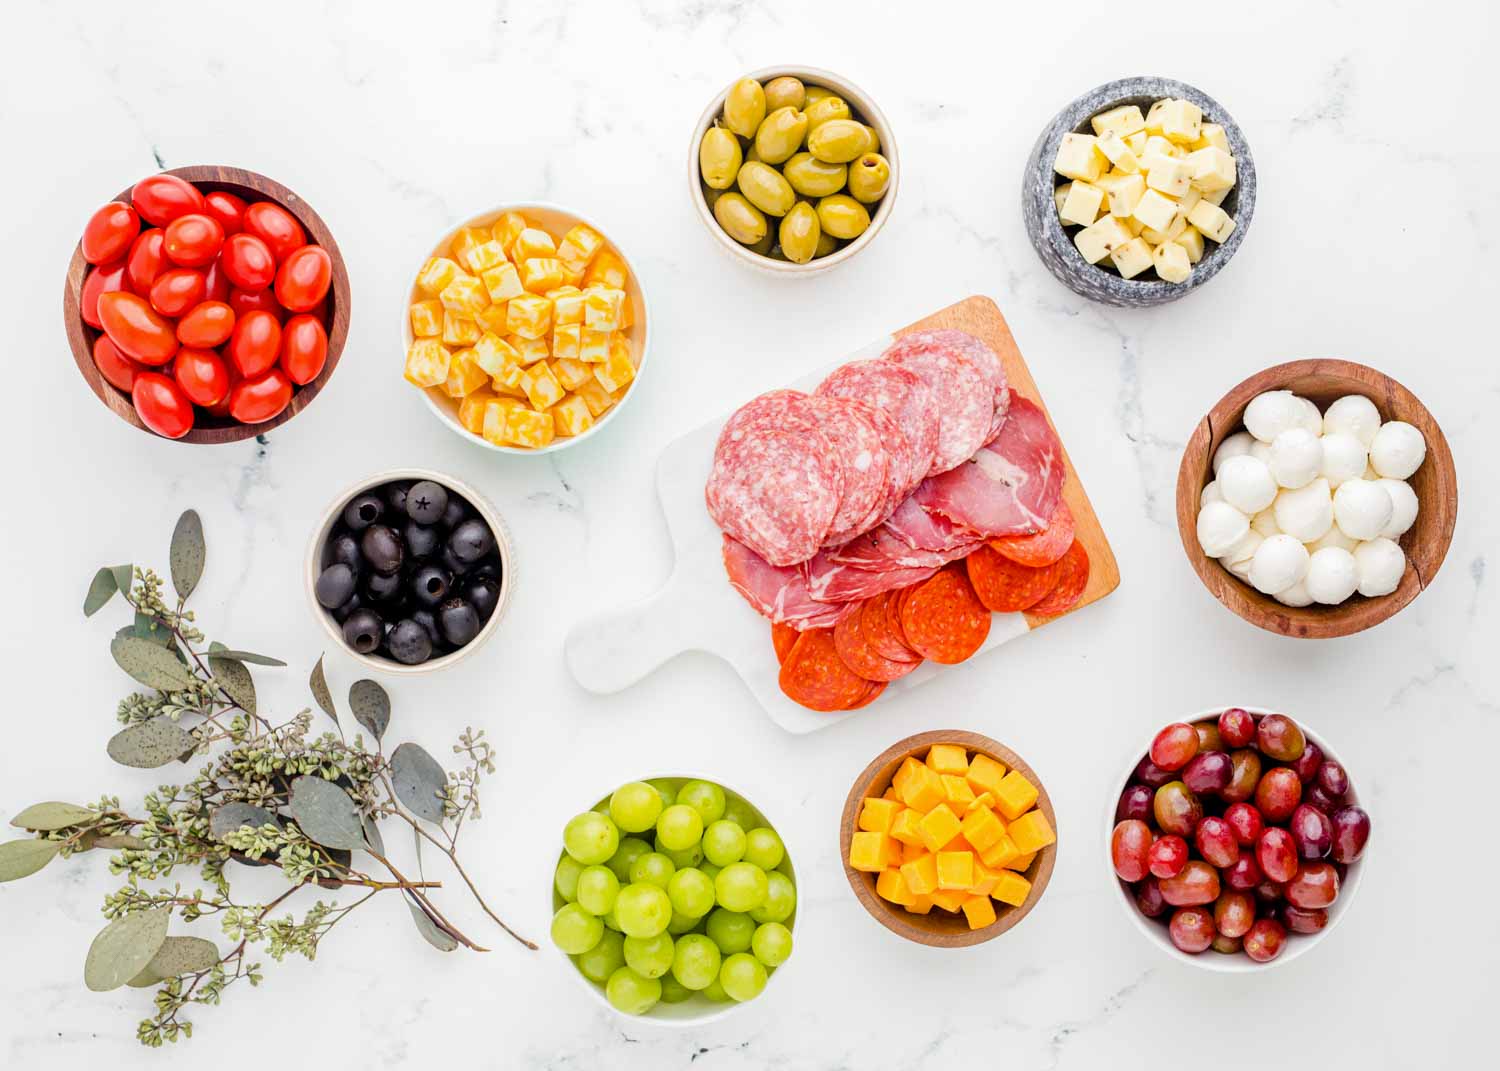 ingredients needed to make a charcuterie board including cheeses, meats, grapes, and cherry tomatoes.